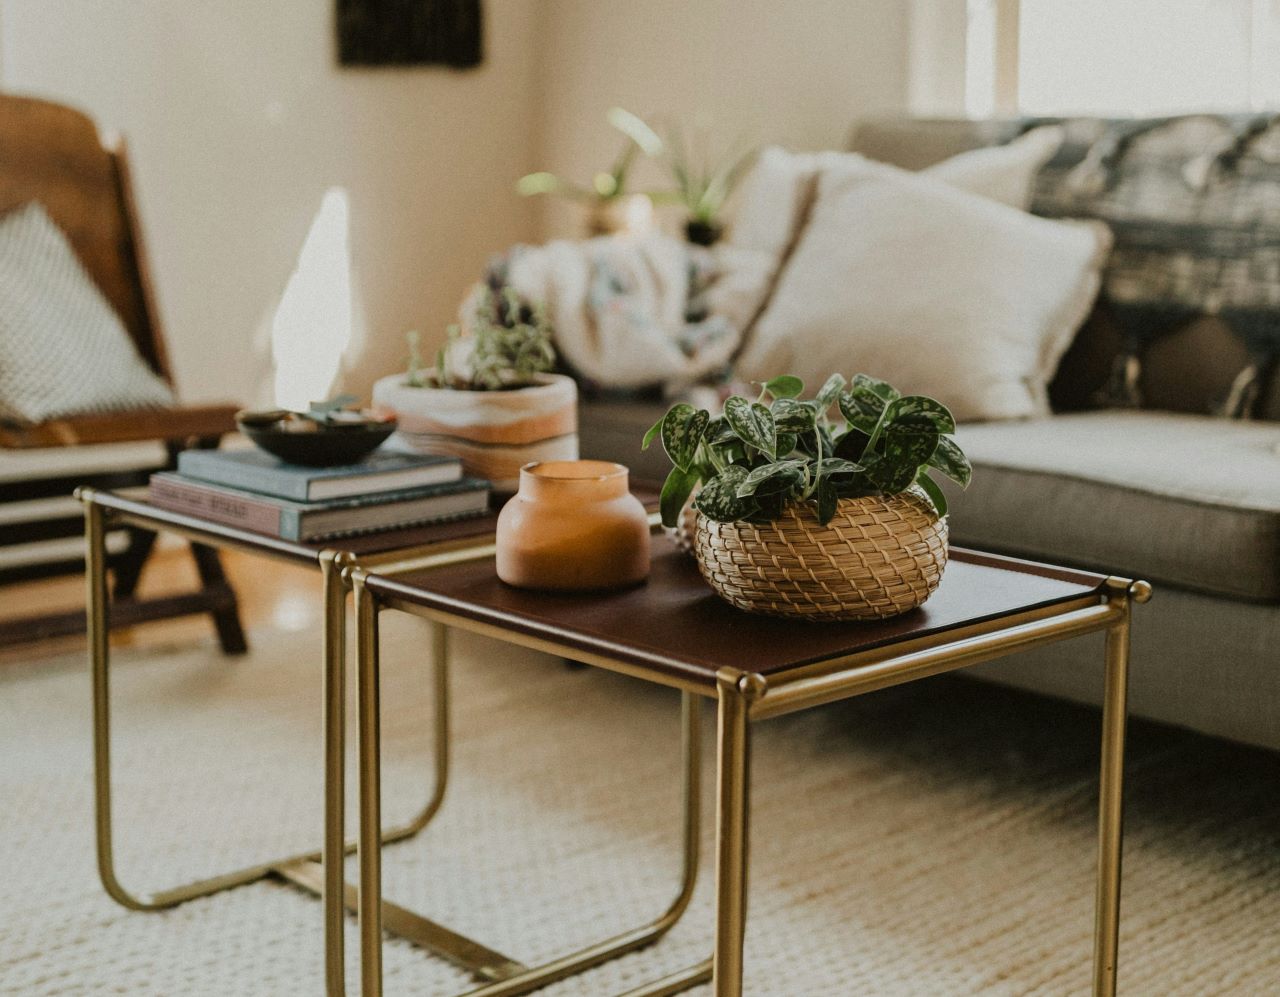 Decorate your coffee table for a stylish living room upgrade.